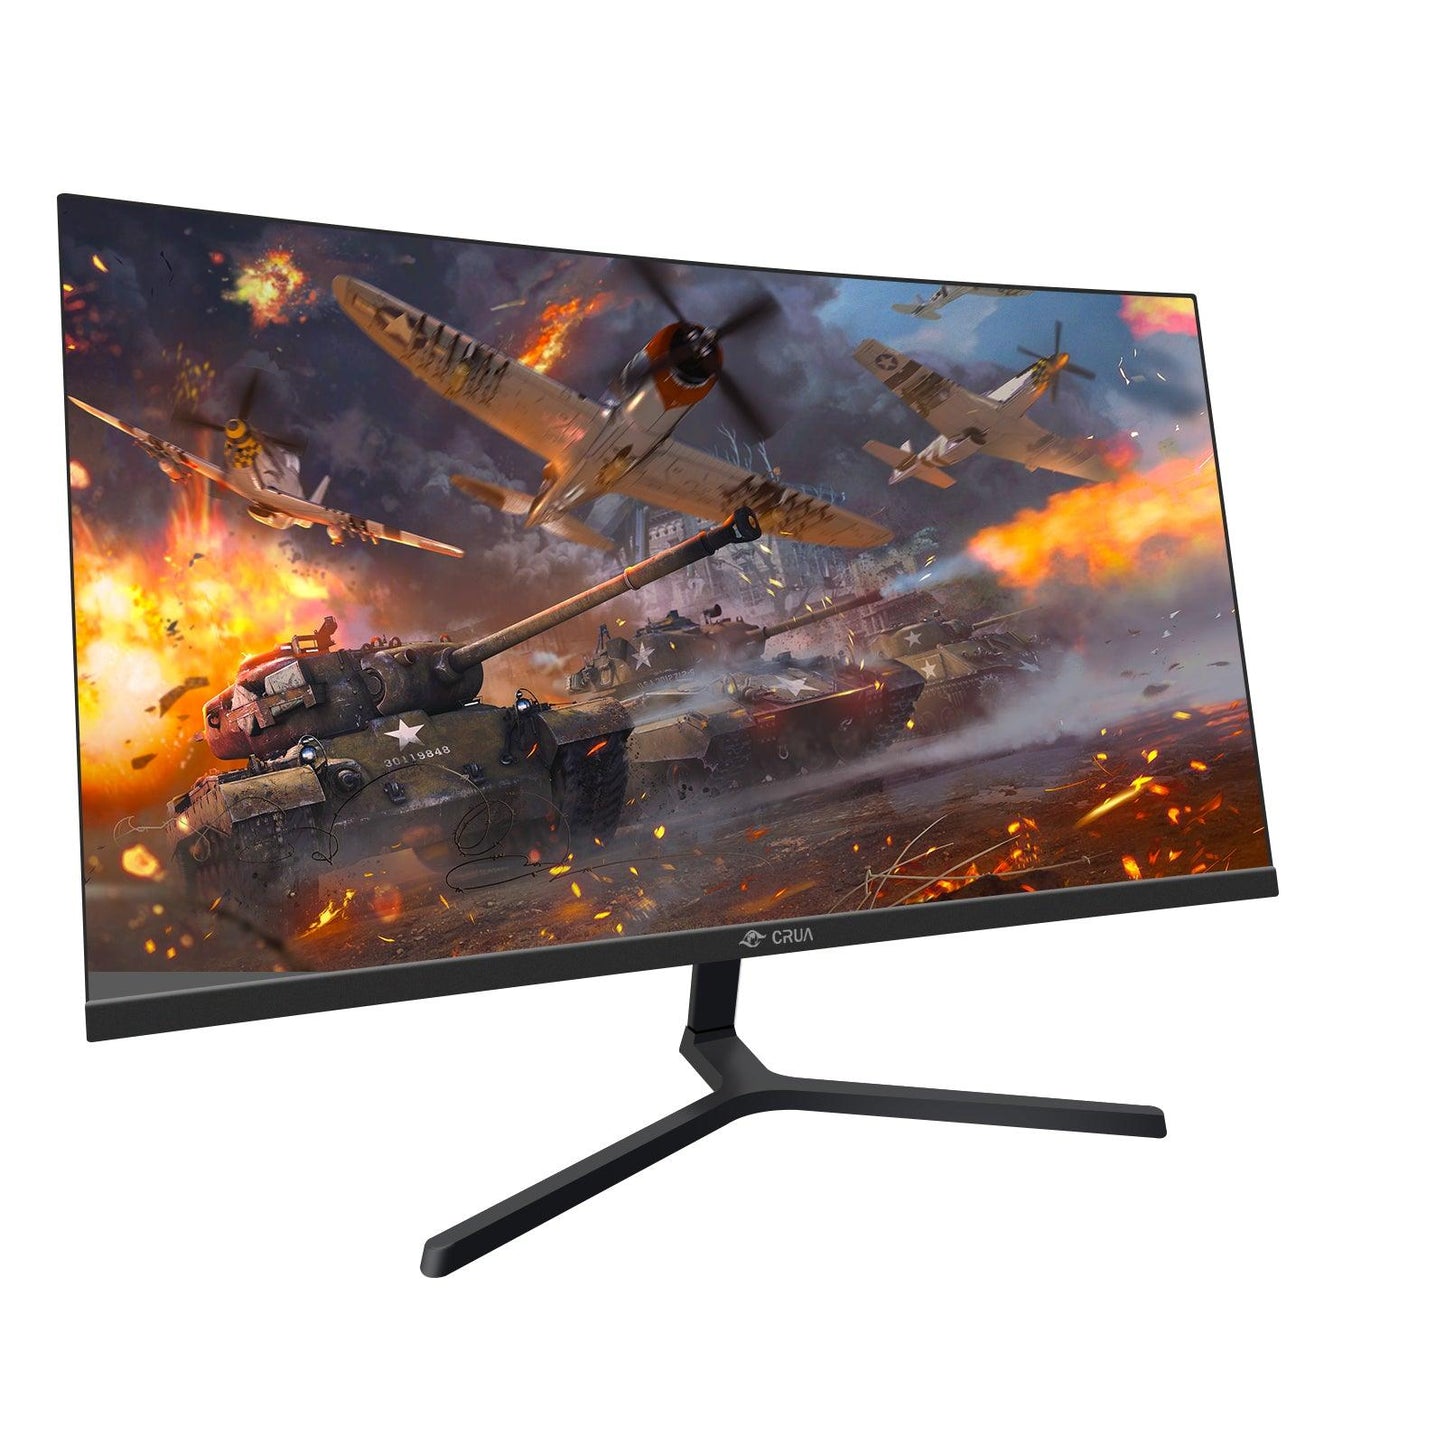 Gawfolk 24.5 Inch Curved Gaming Monitor, 180hz/165hz FHD(1080P) PC Monitor,  Frameless VA Display with sRGB 100%, Eye Care, DP/HDMI, Wall Mount